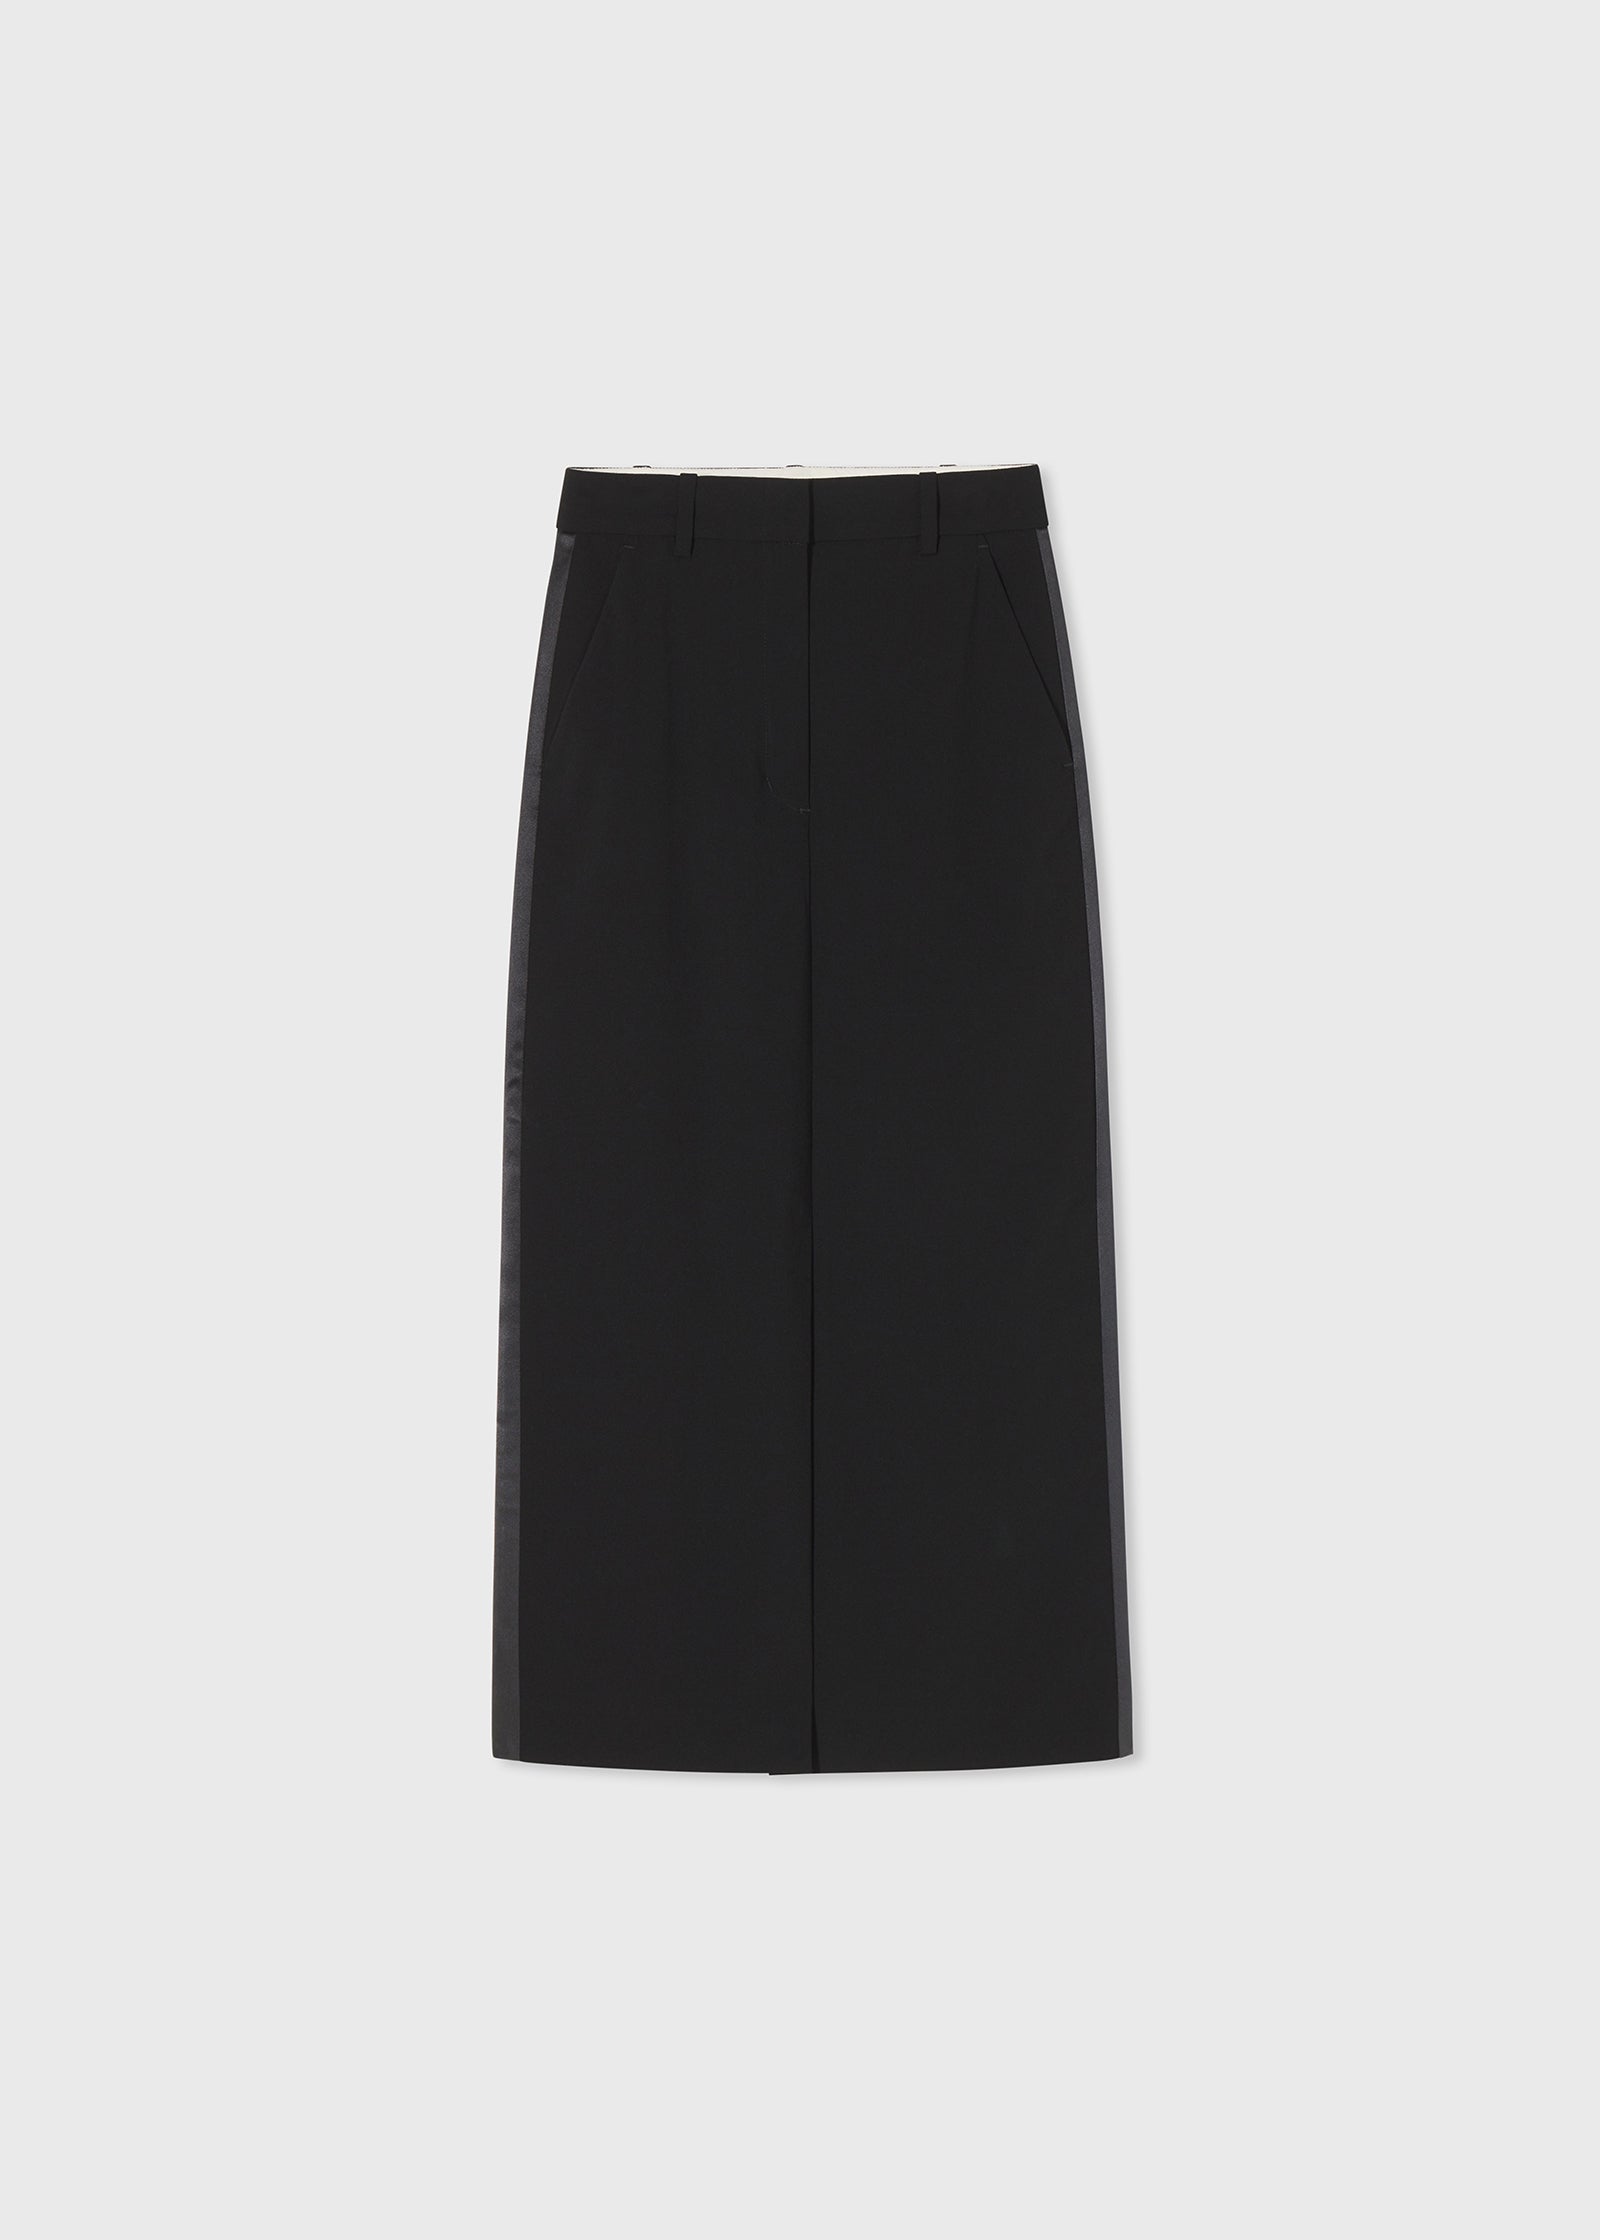 Tuxedo Pencil Skirt in Stretch Virgin Wool - Black - CO Collections